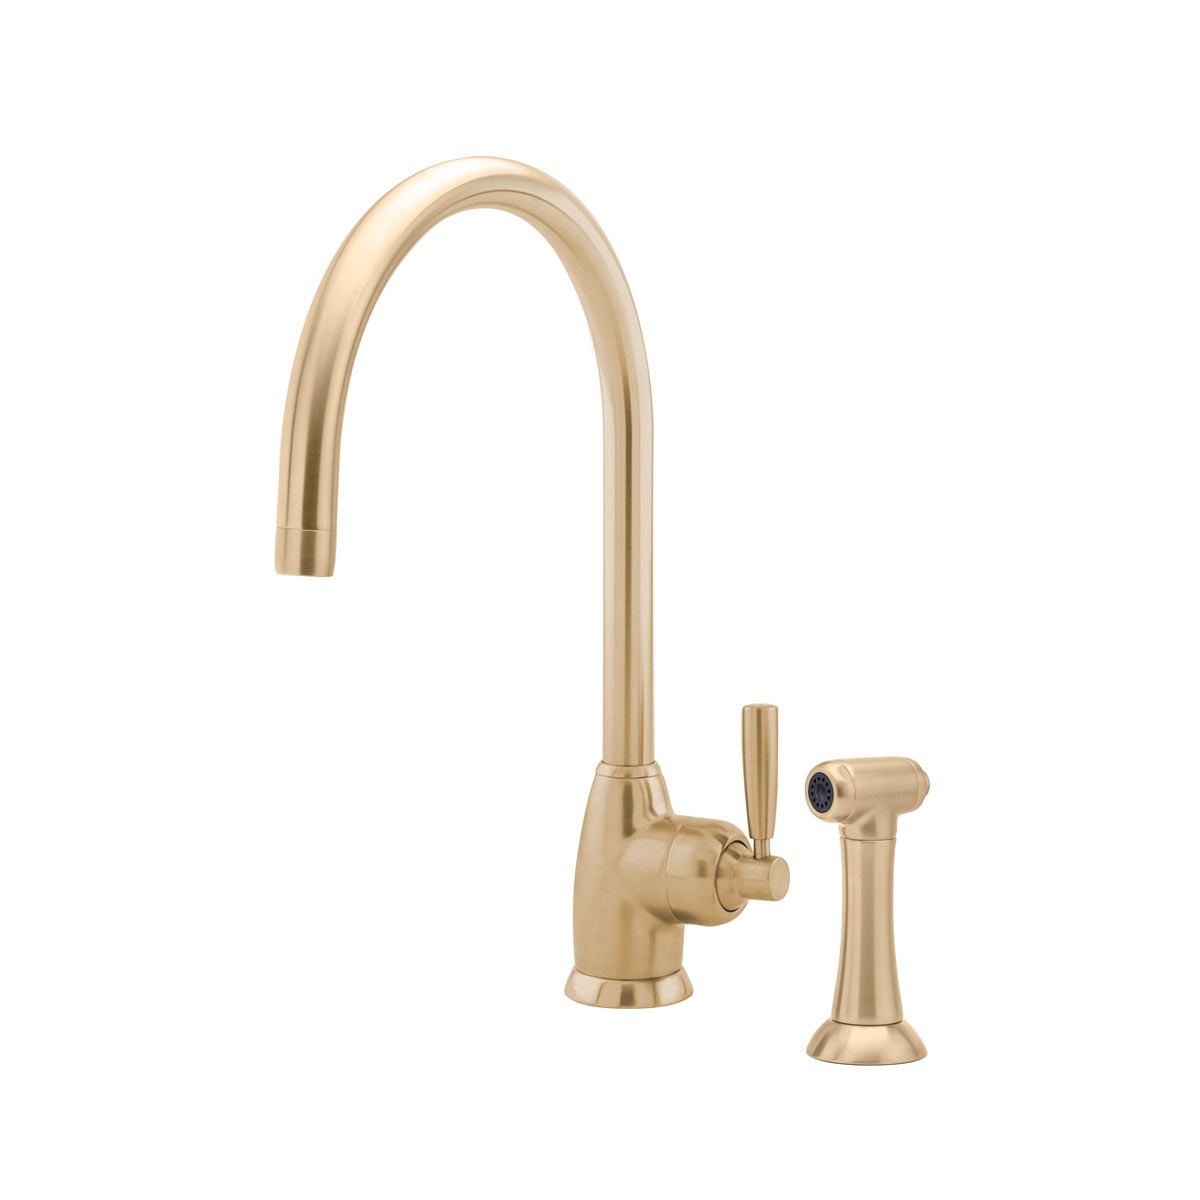 Shaws by Perrin & Rowe Roeburn kitchen mixer with spray rinse in Satin Brass. Mimas style monobloc kitchen tap AUSH.4846. Distributed in Australia by Luxe by Design, Brisbane.